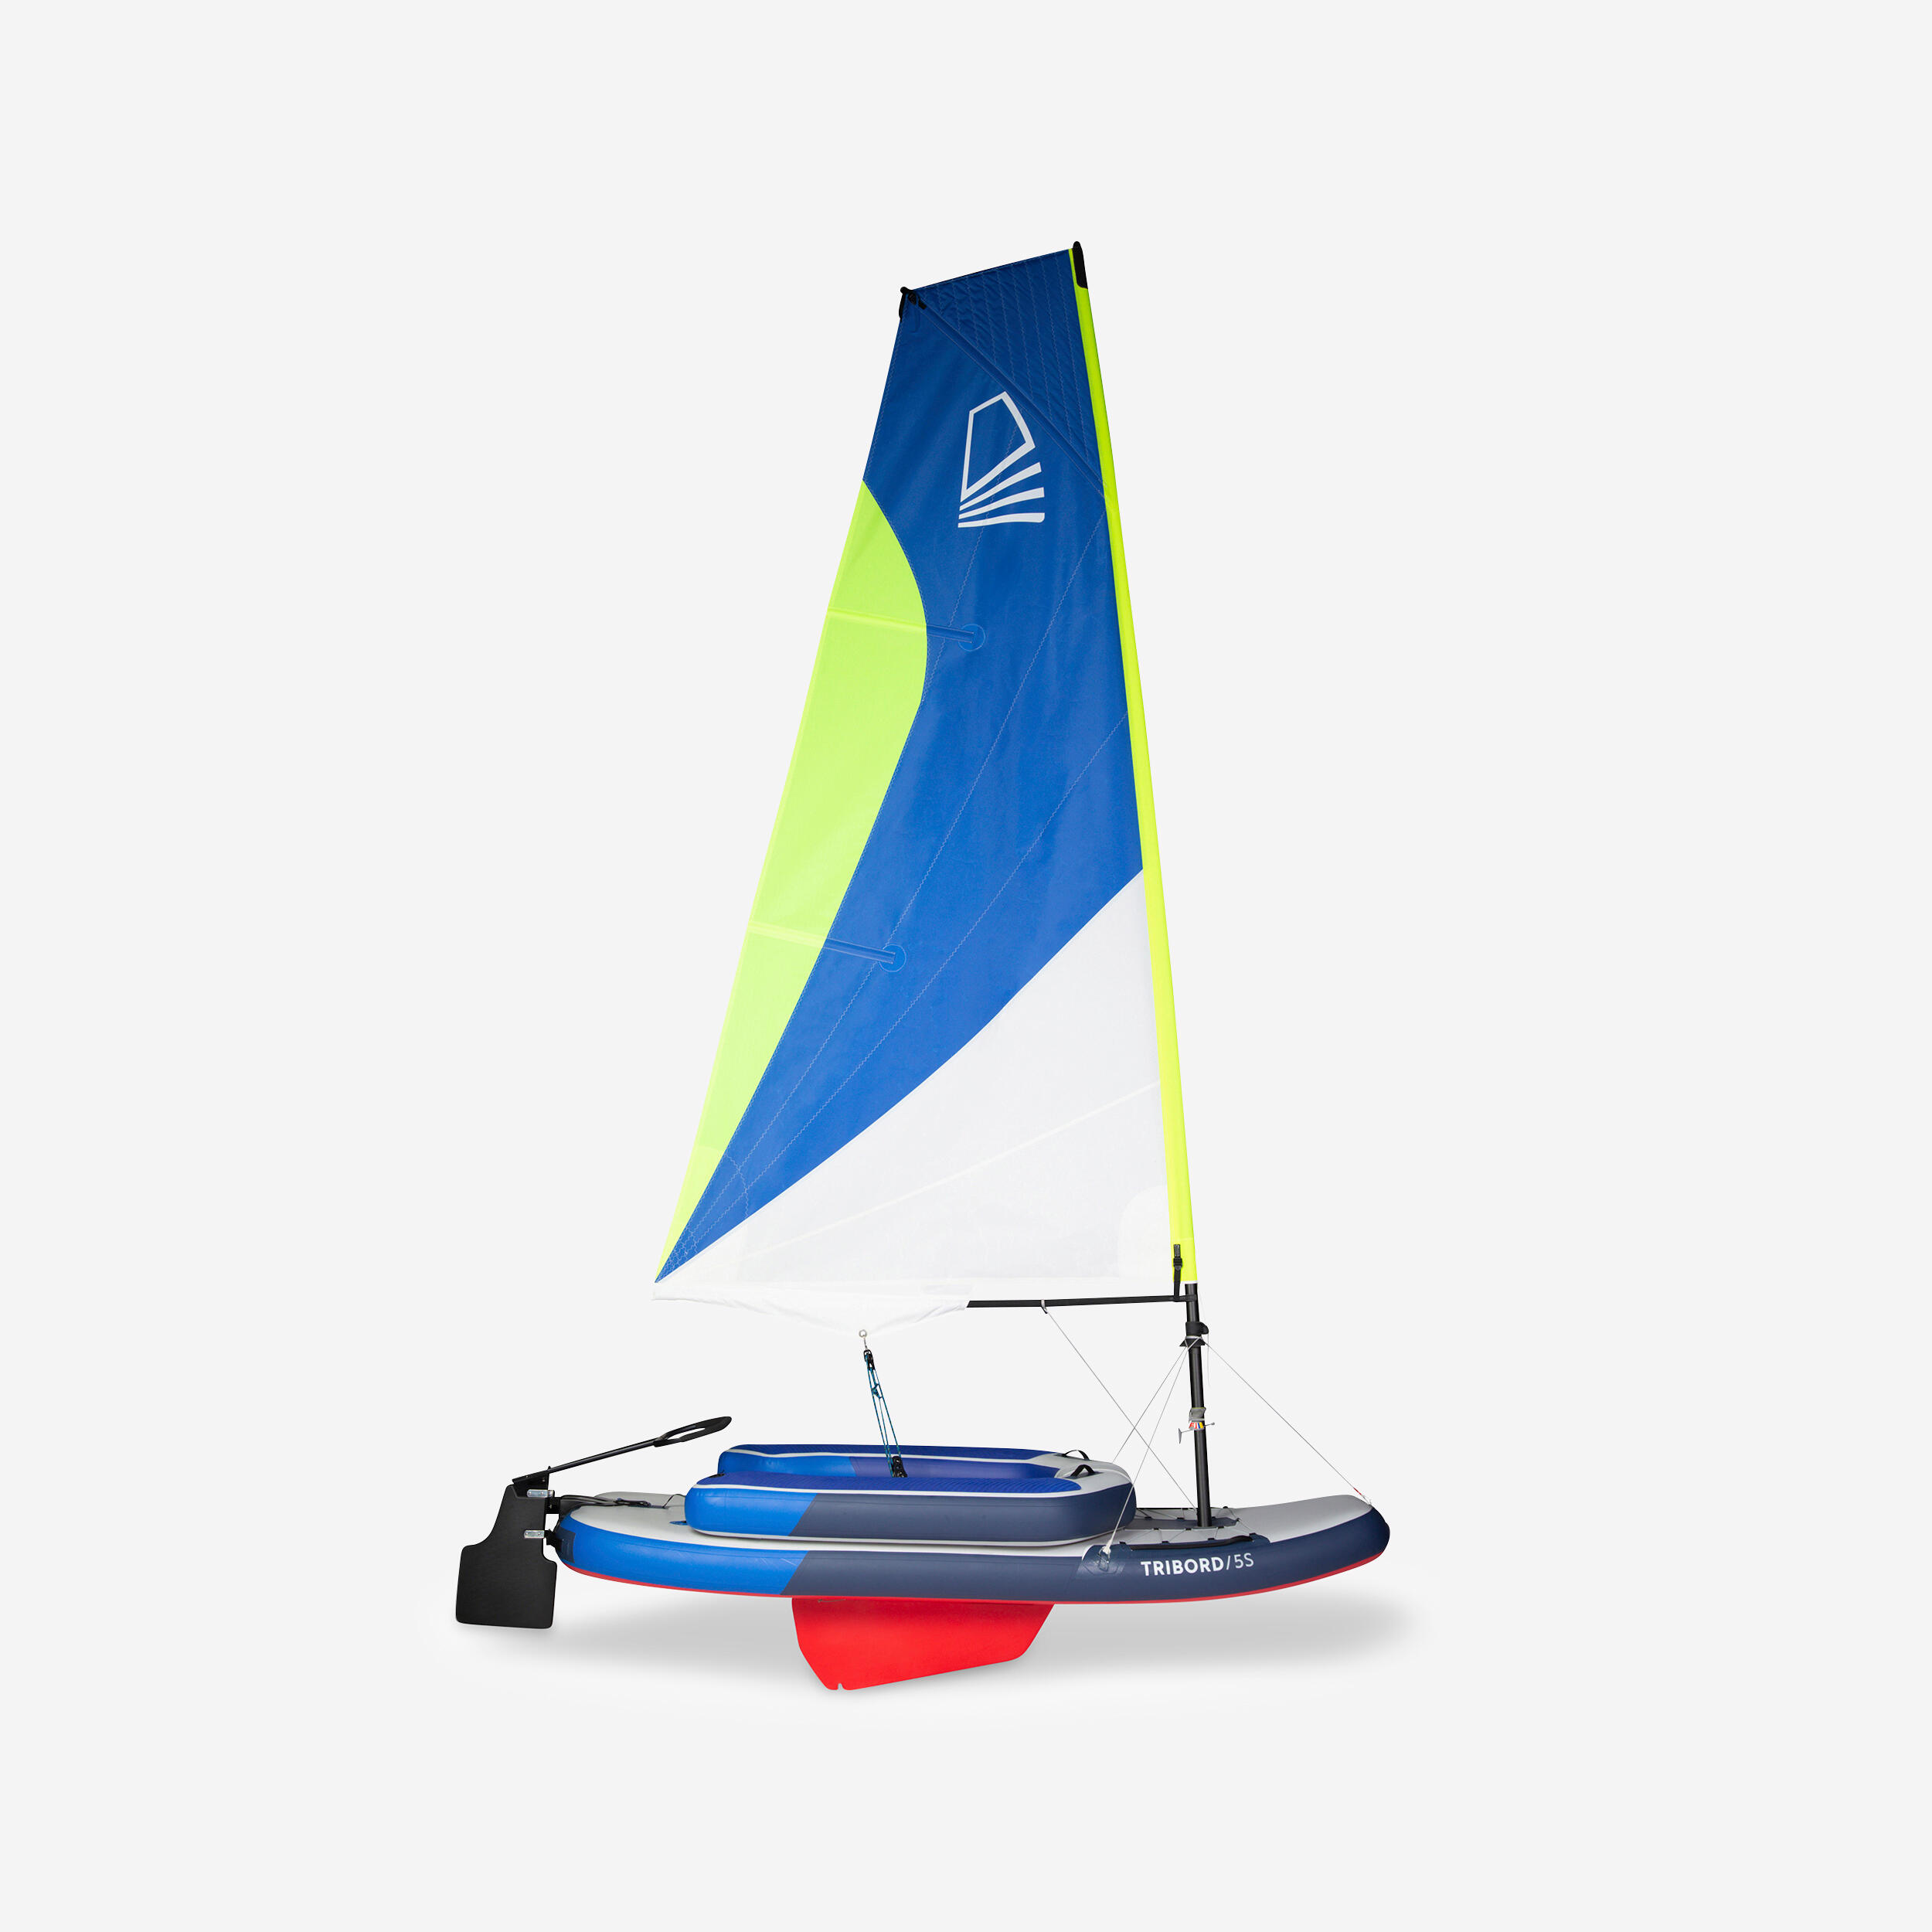 TRIBORD Inflatable sailing dinghy Tribord 5S